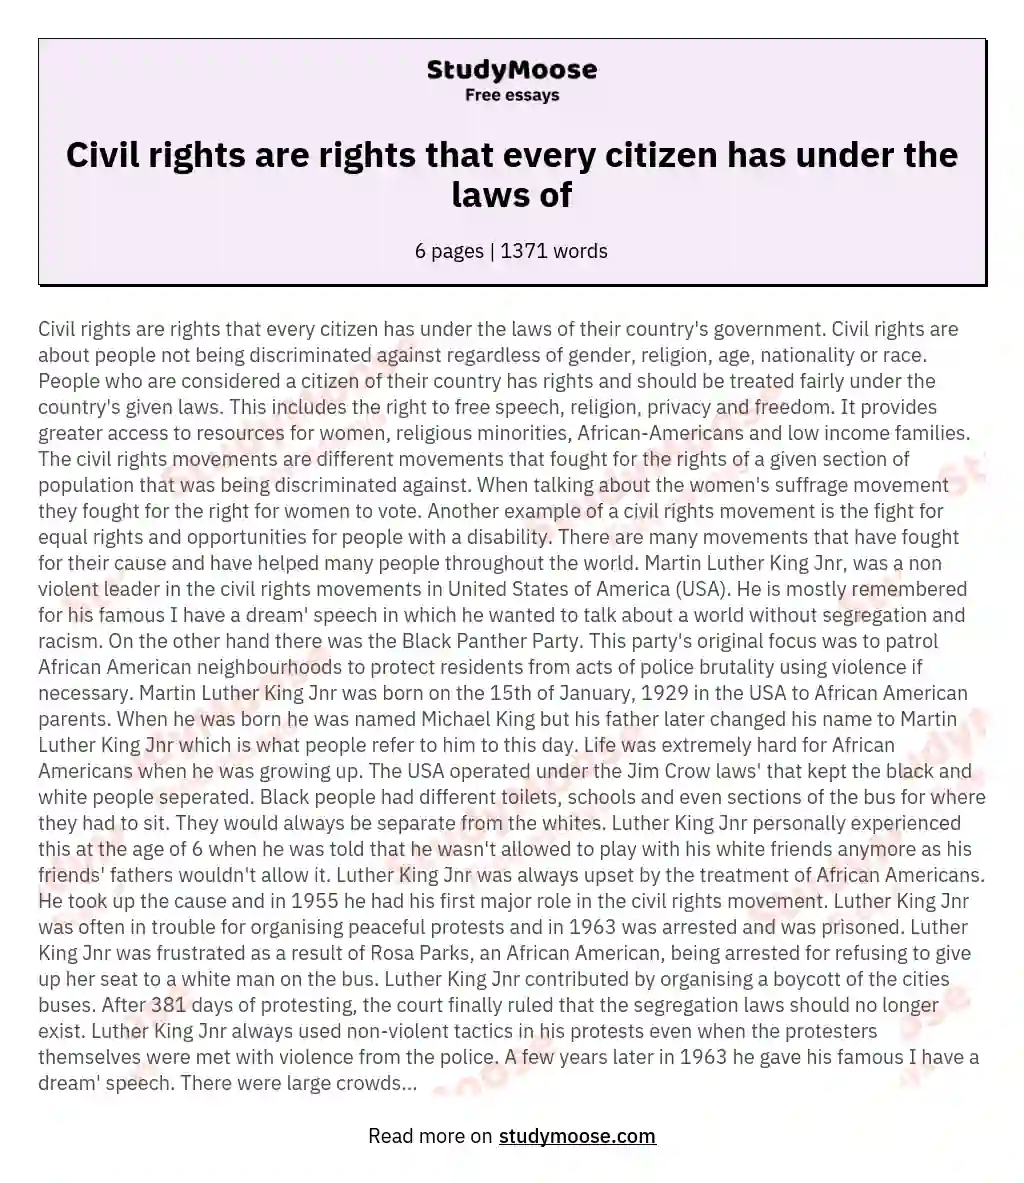 Civil rights are rights that every citizen has under the laws of